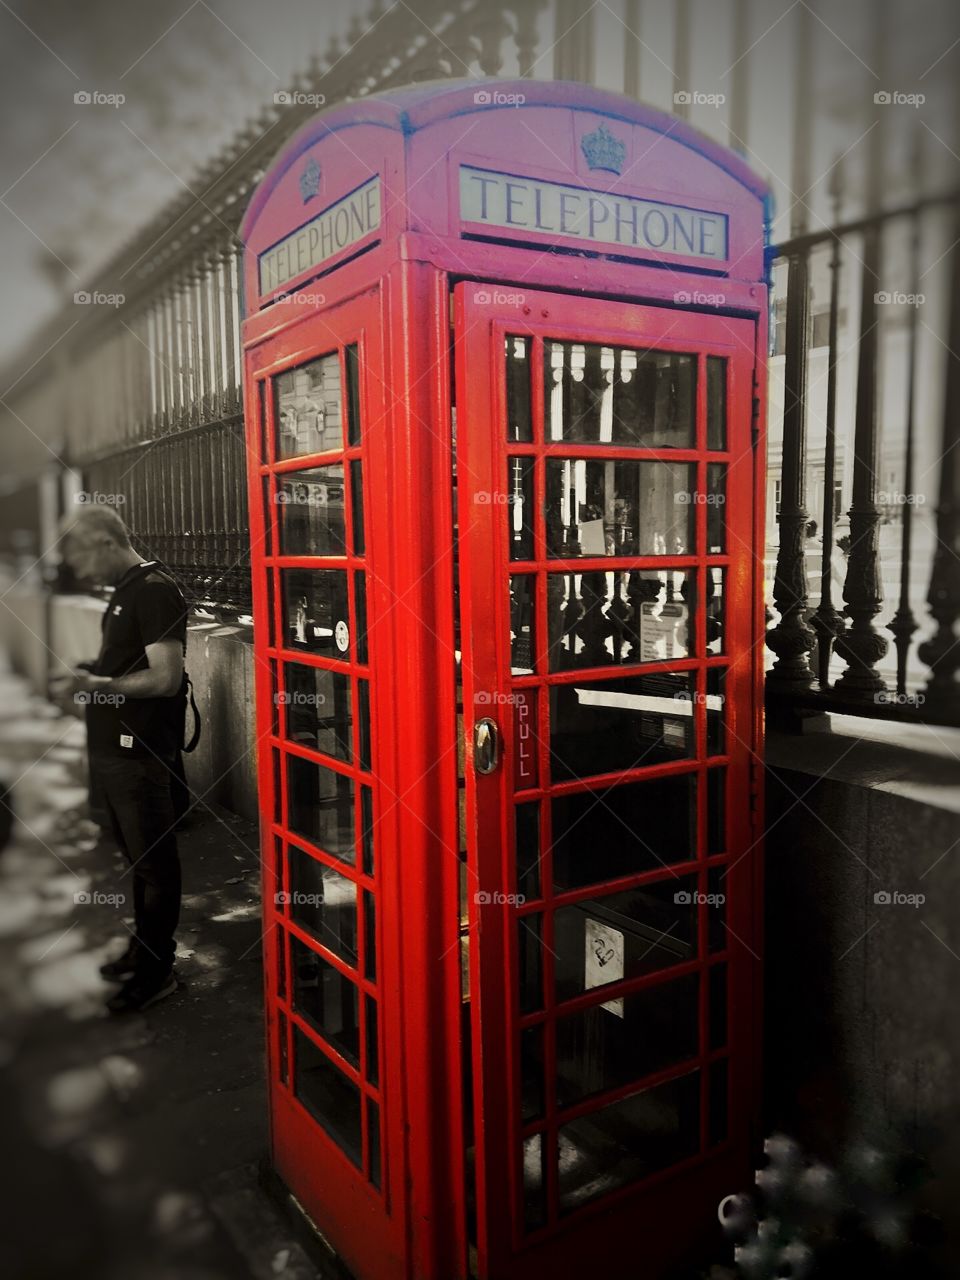 London's iconic Phone booth